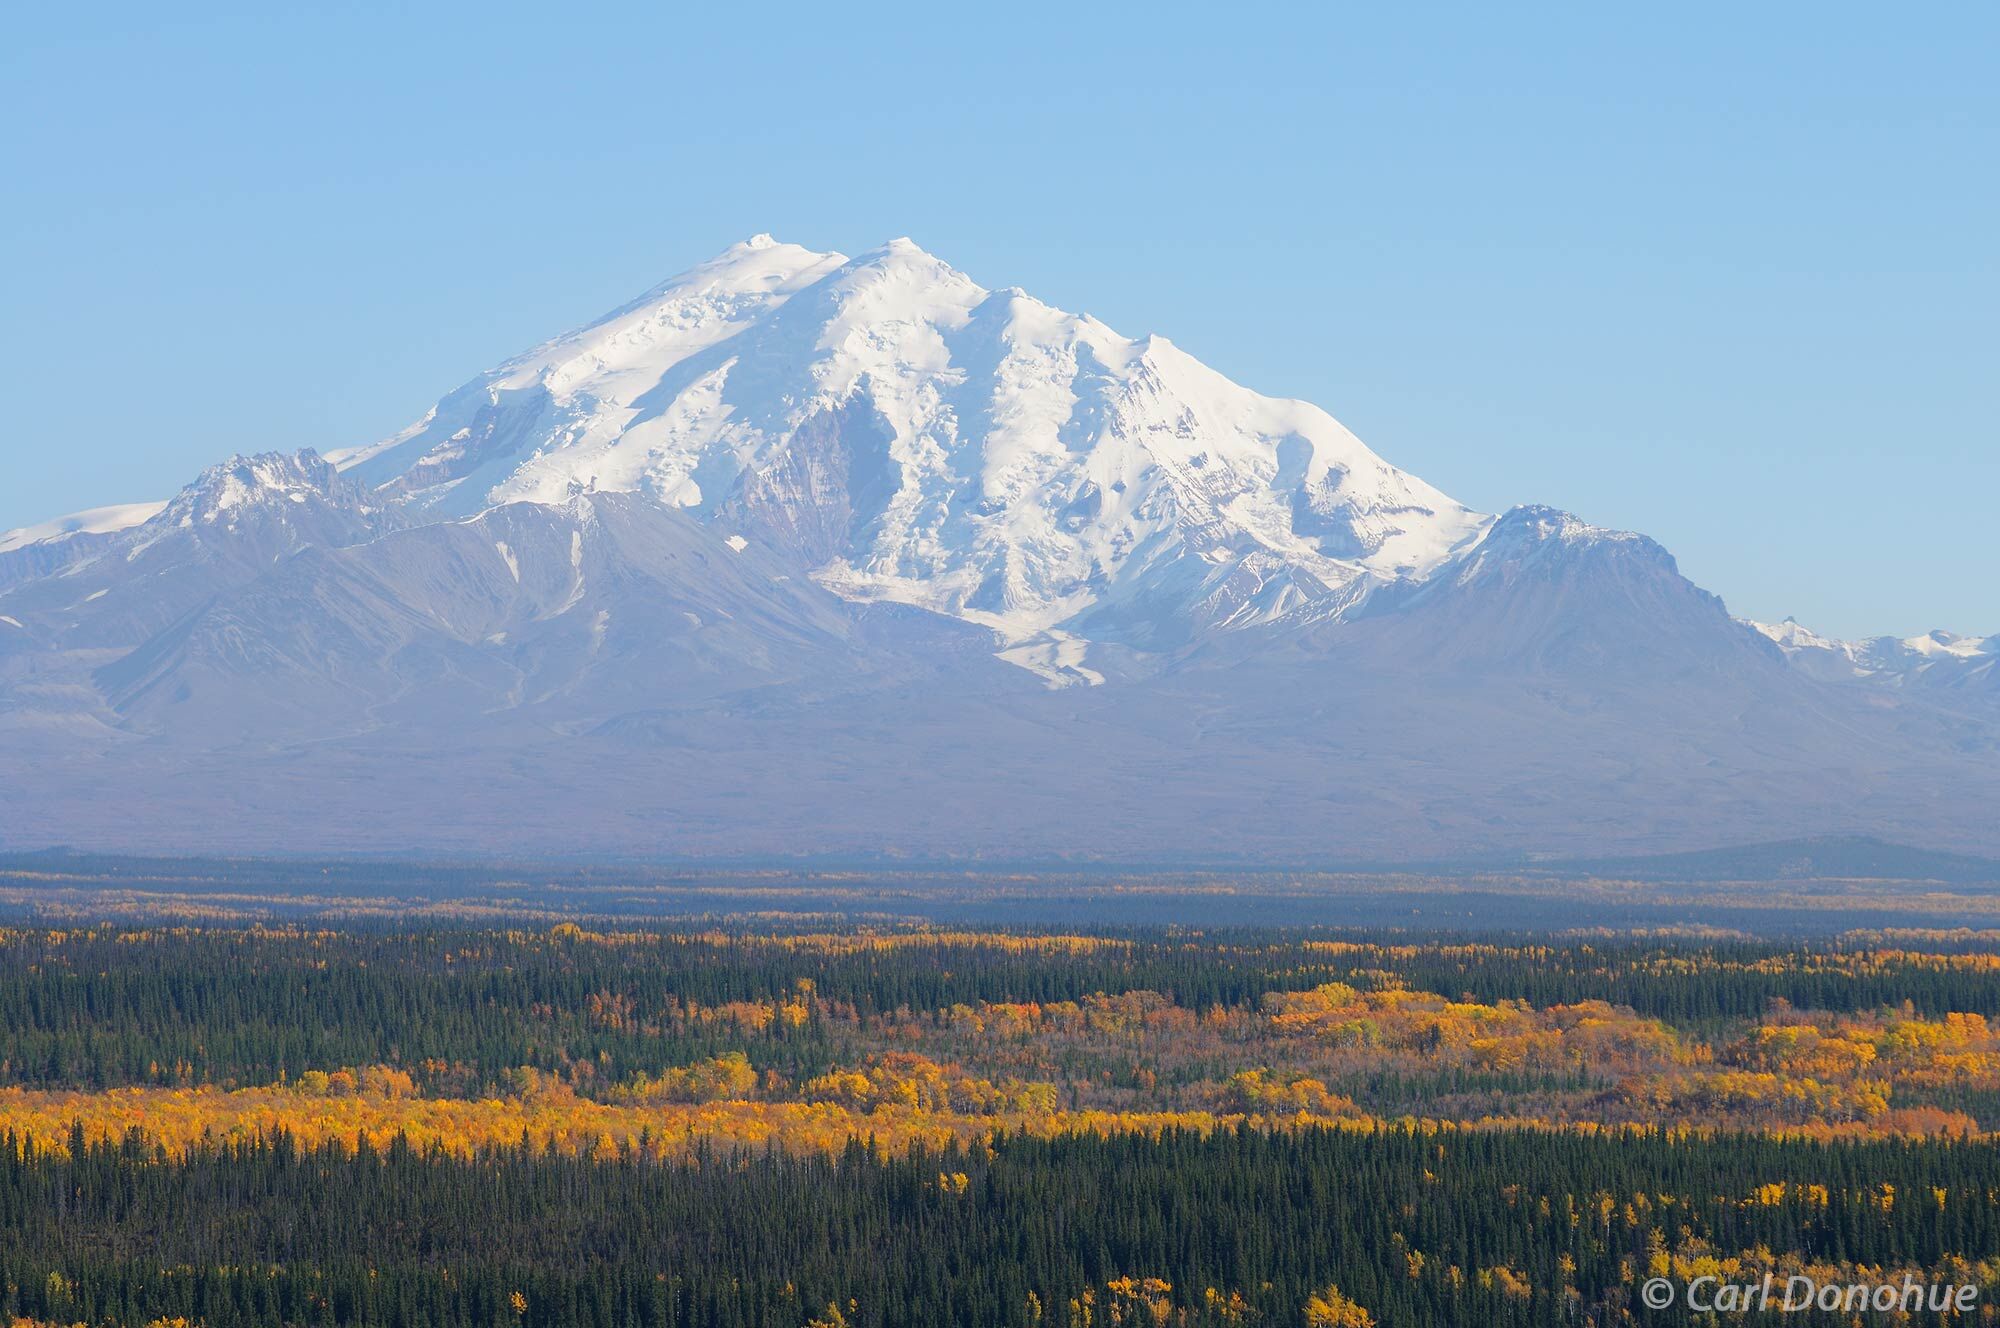 Mount Drum, of the Wrangell Mountains, rises high above the Copper River Basin. Fall colors glow in the boreal forest below....